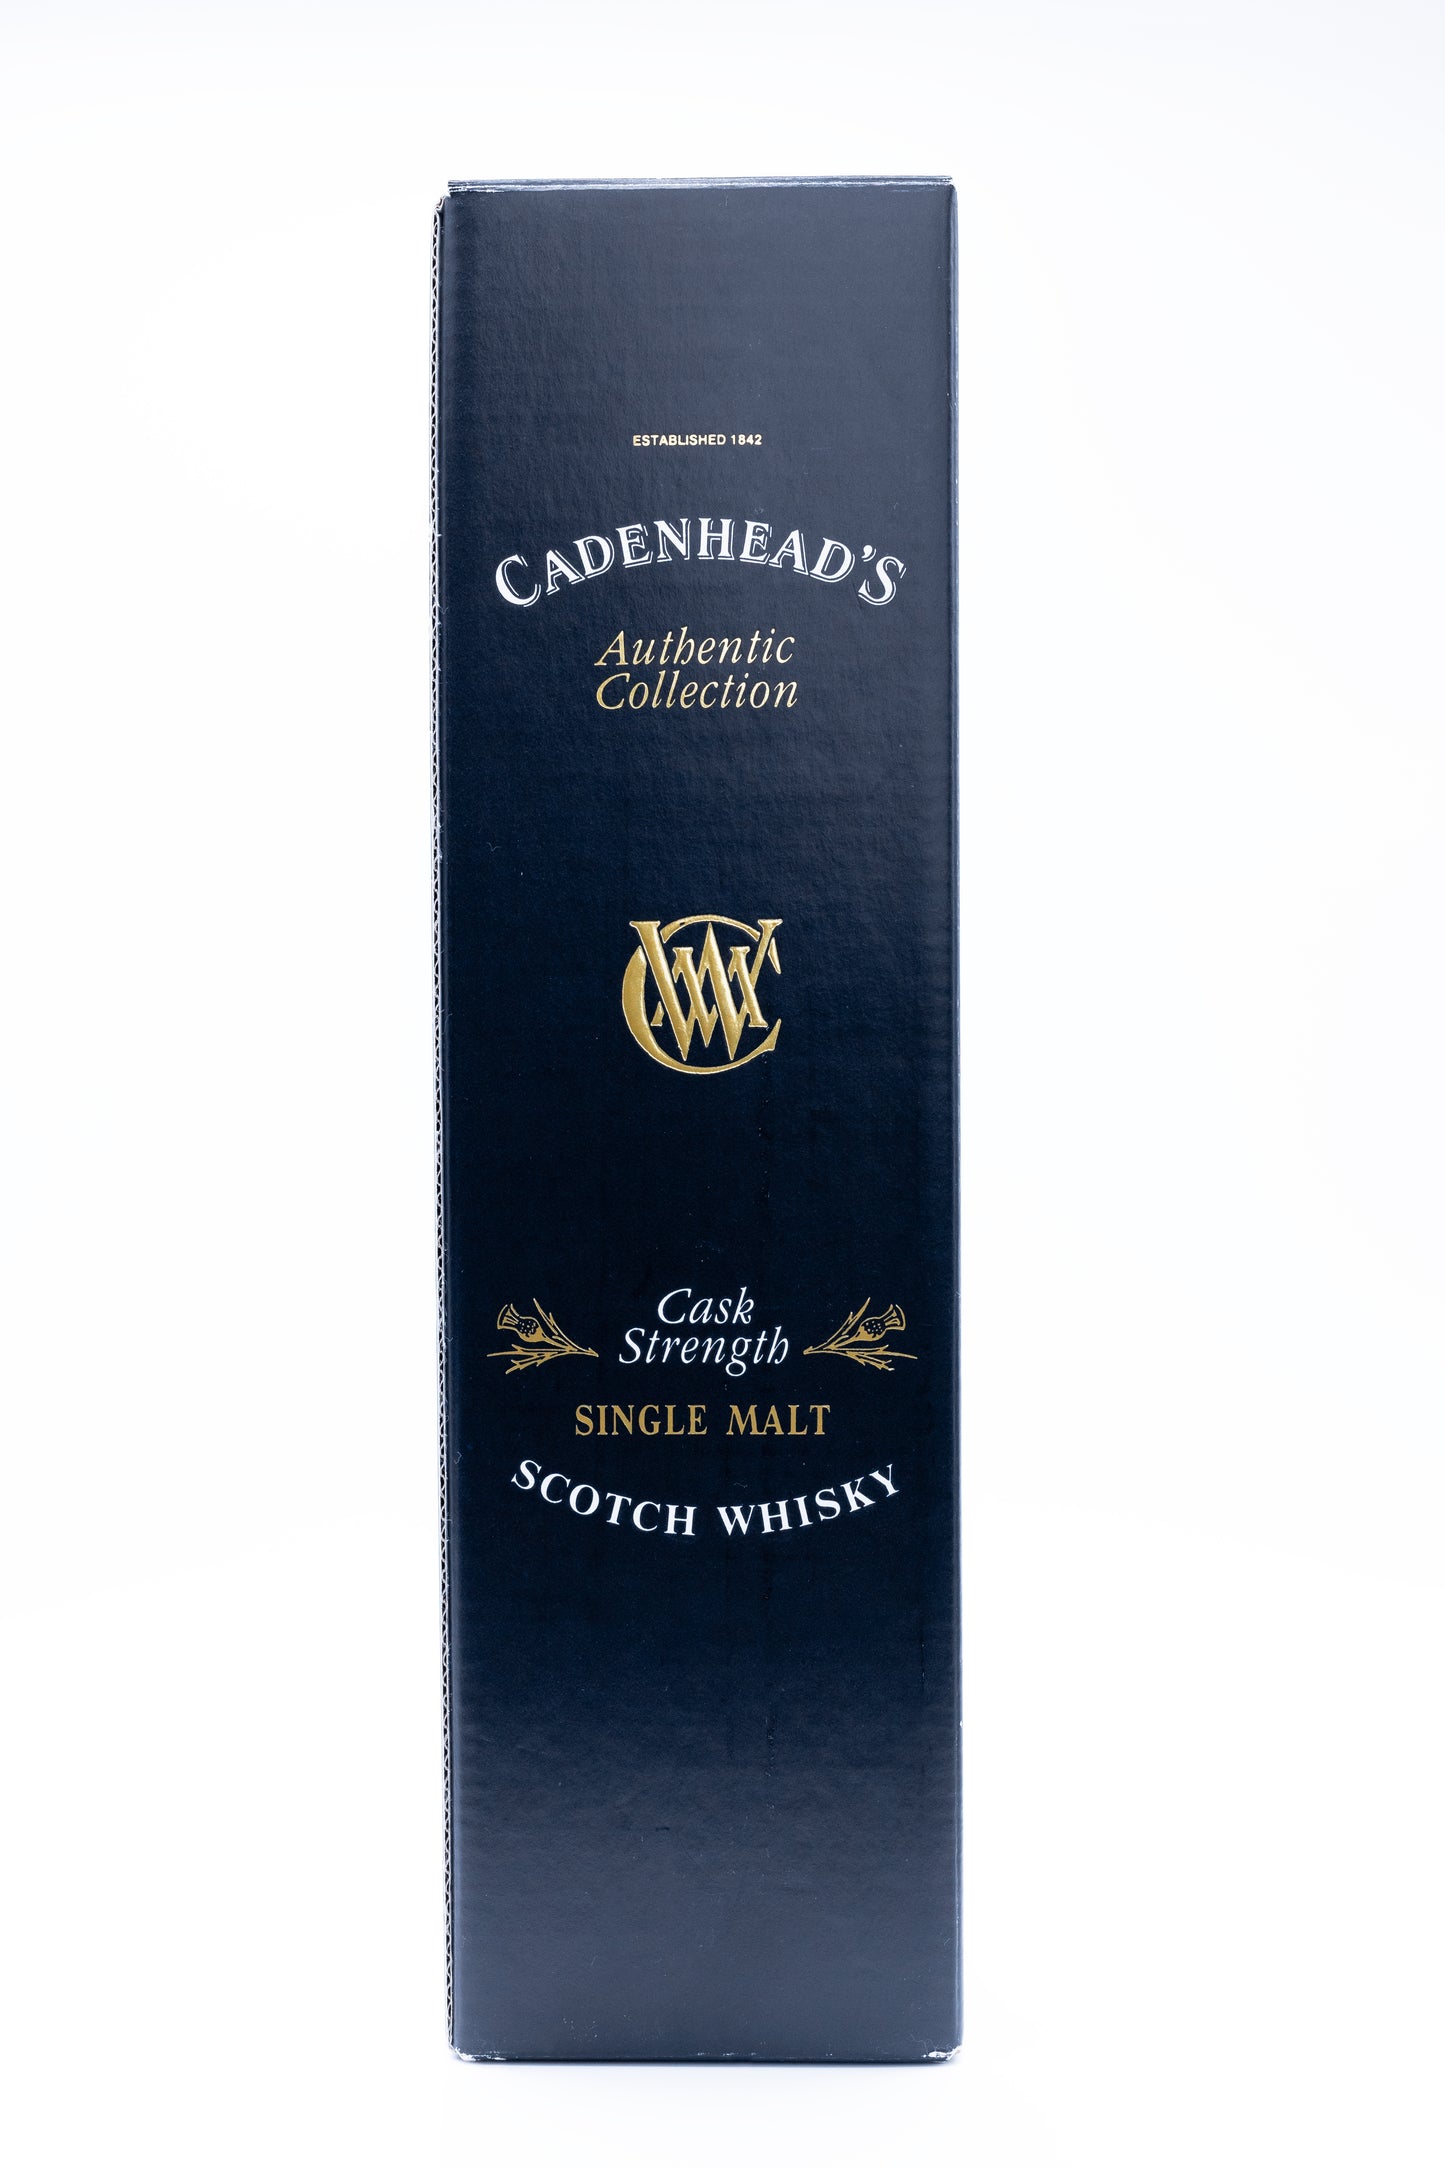 Glenlochy 17 year old Cadenehead's Authentic Collection